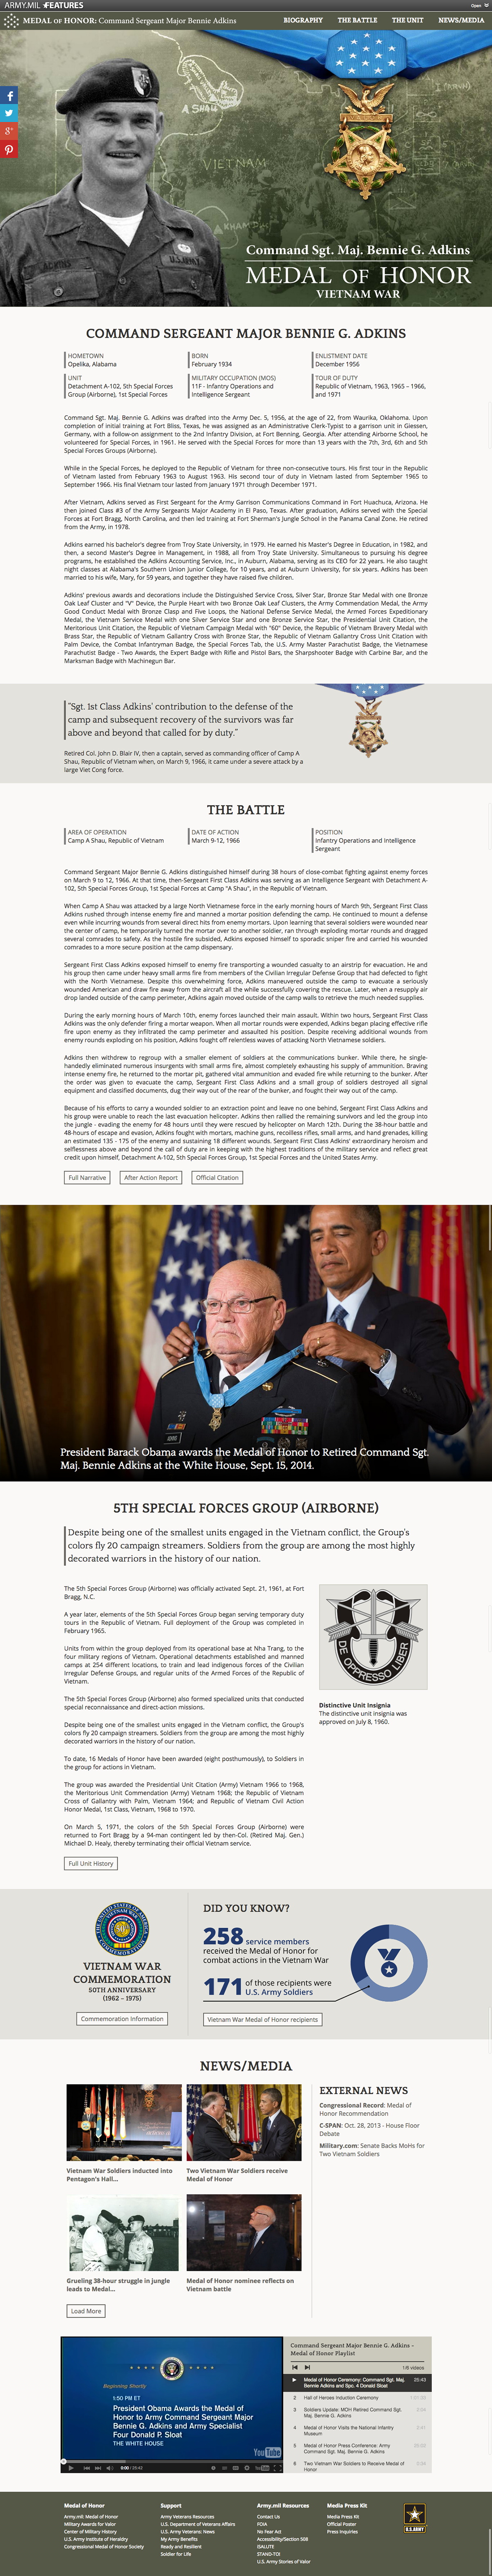 medal of honor U.S. Army Military White House Vietname war War Website Responsive battle Medal award #cips_awards_citizens #CIPS_Awards_Heroes #CIPS_awards_cross-channel